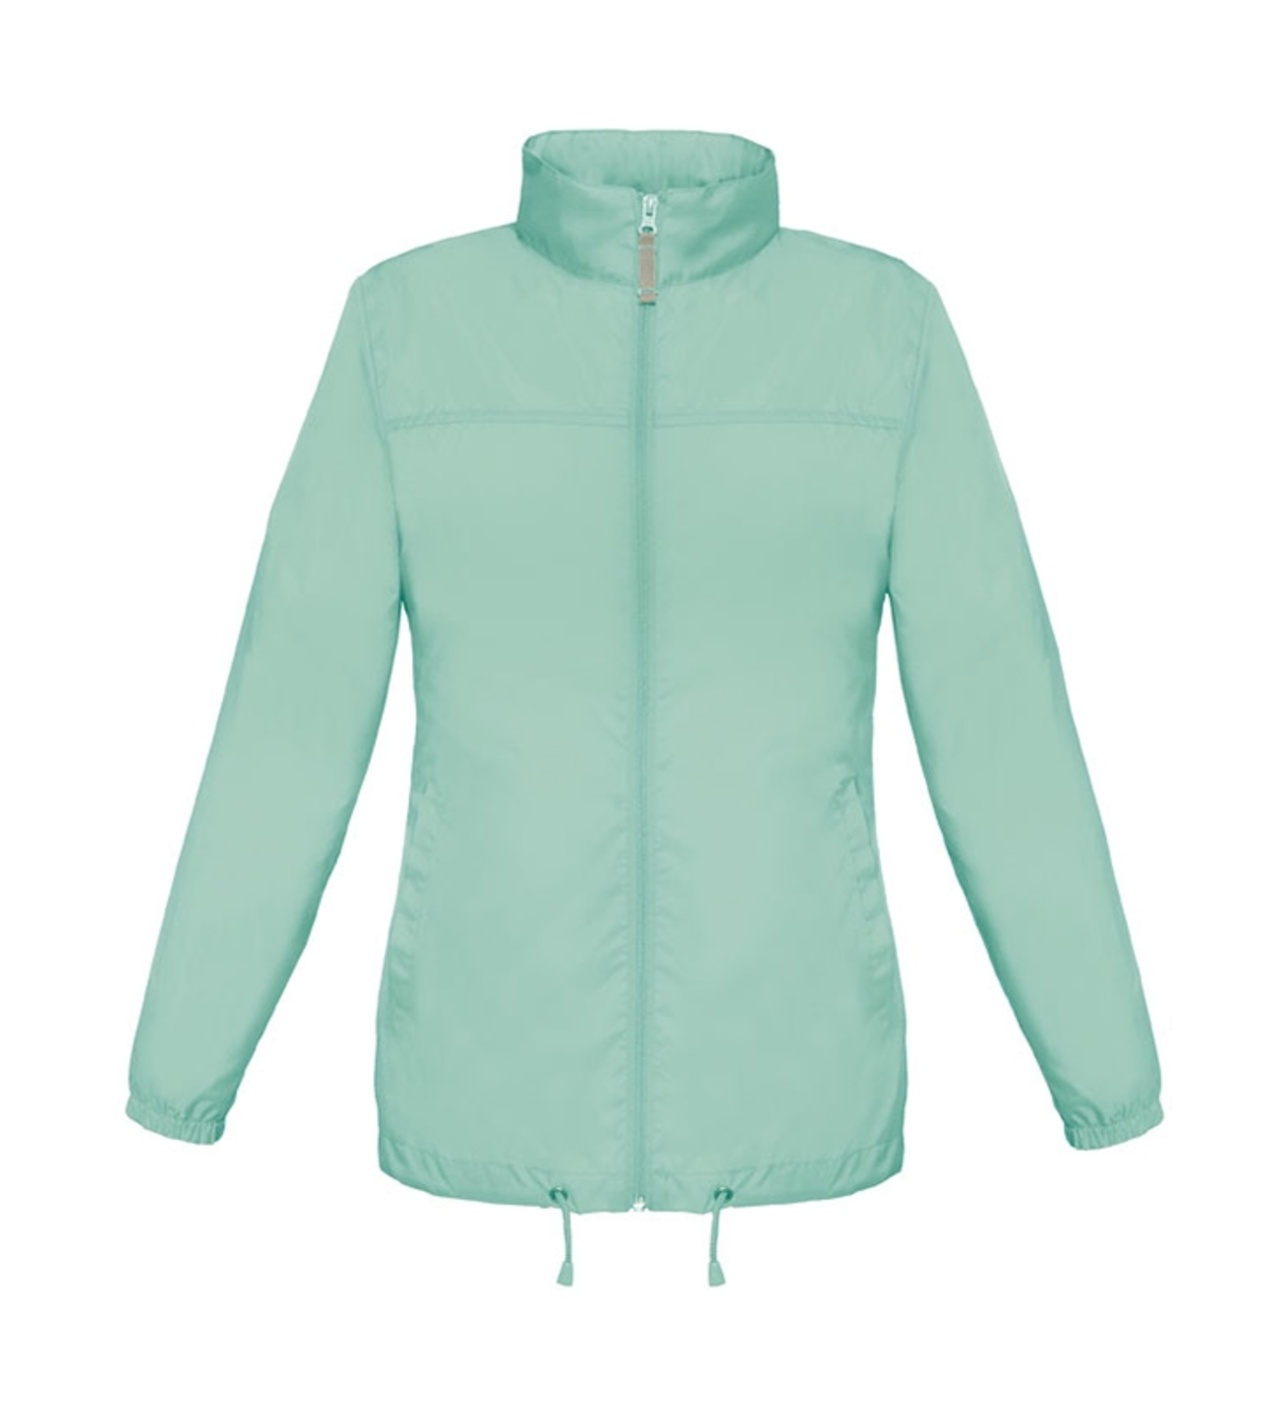 B and C Collection Sirocco Woman - PIXEL TURQUOISE - XS